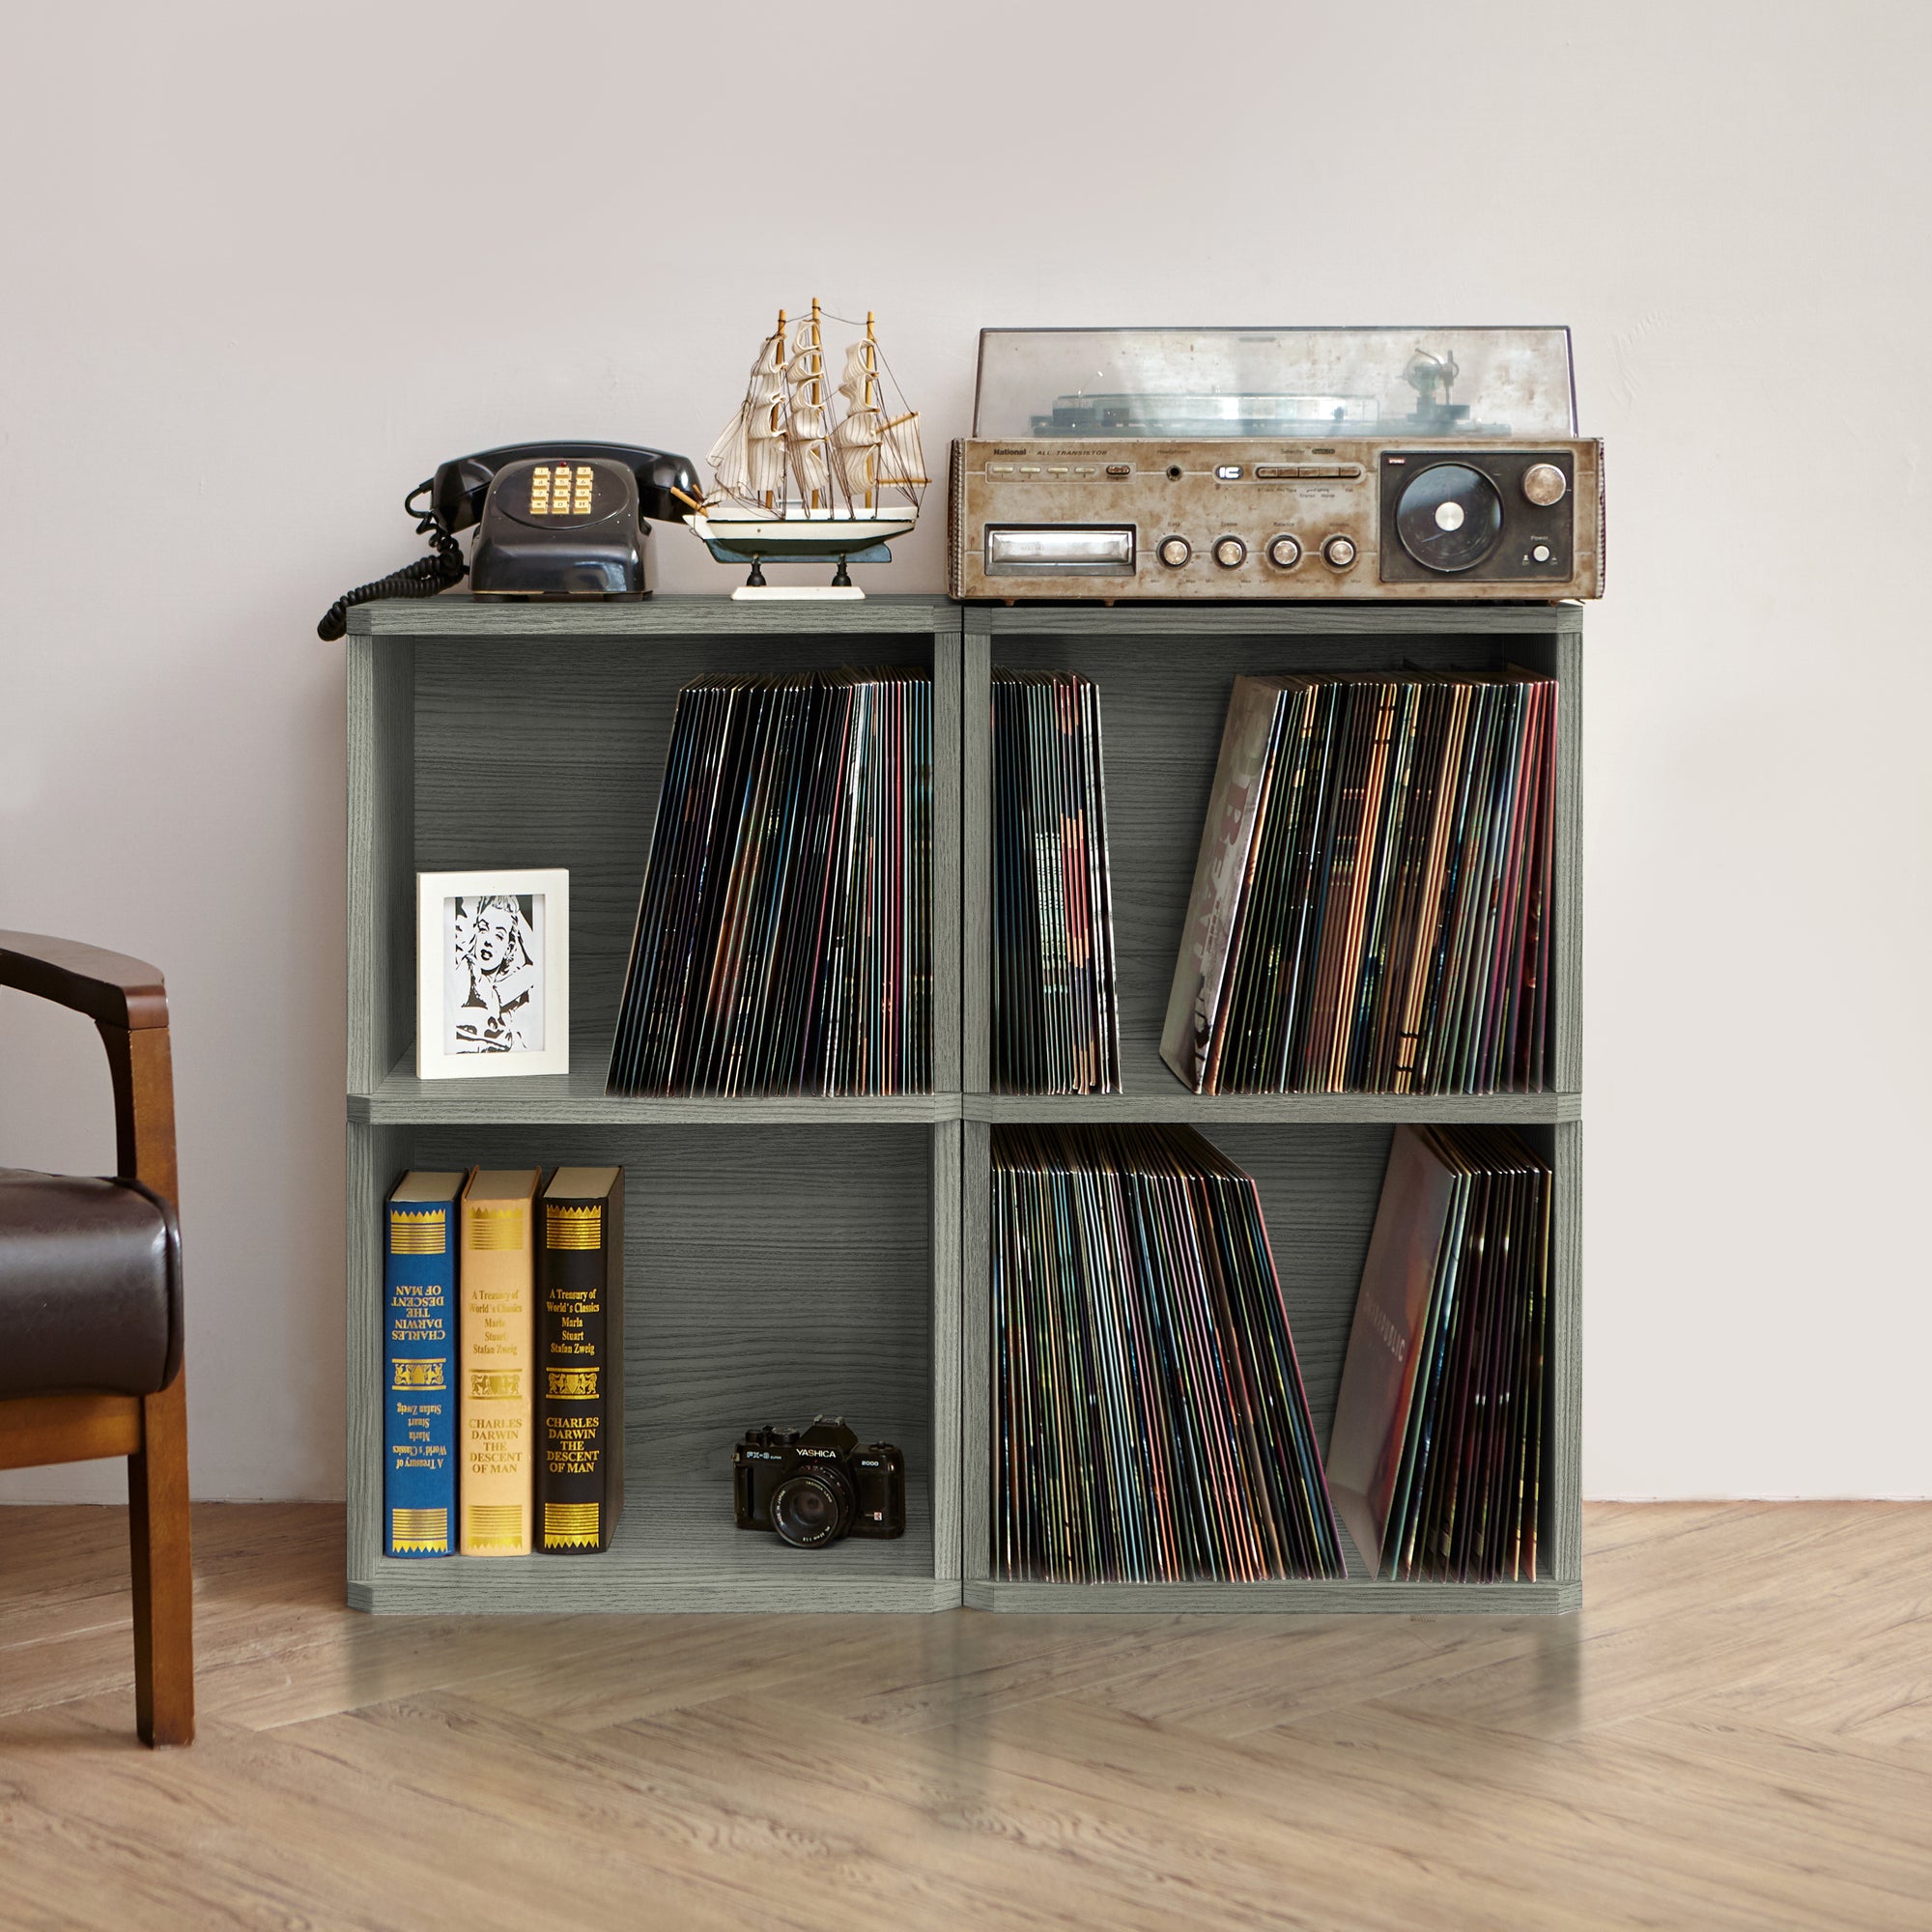 Vinyl Record Storage: 9 Stylish Small-Space Solutions